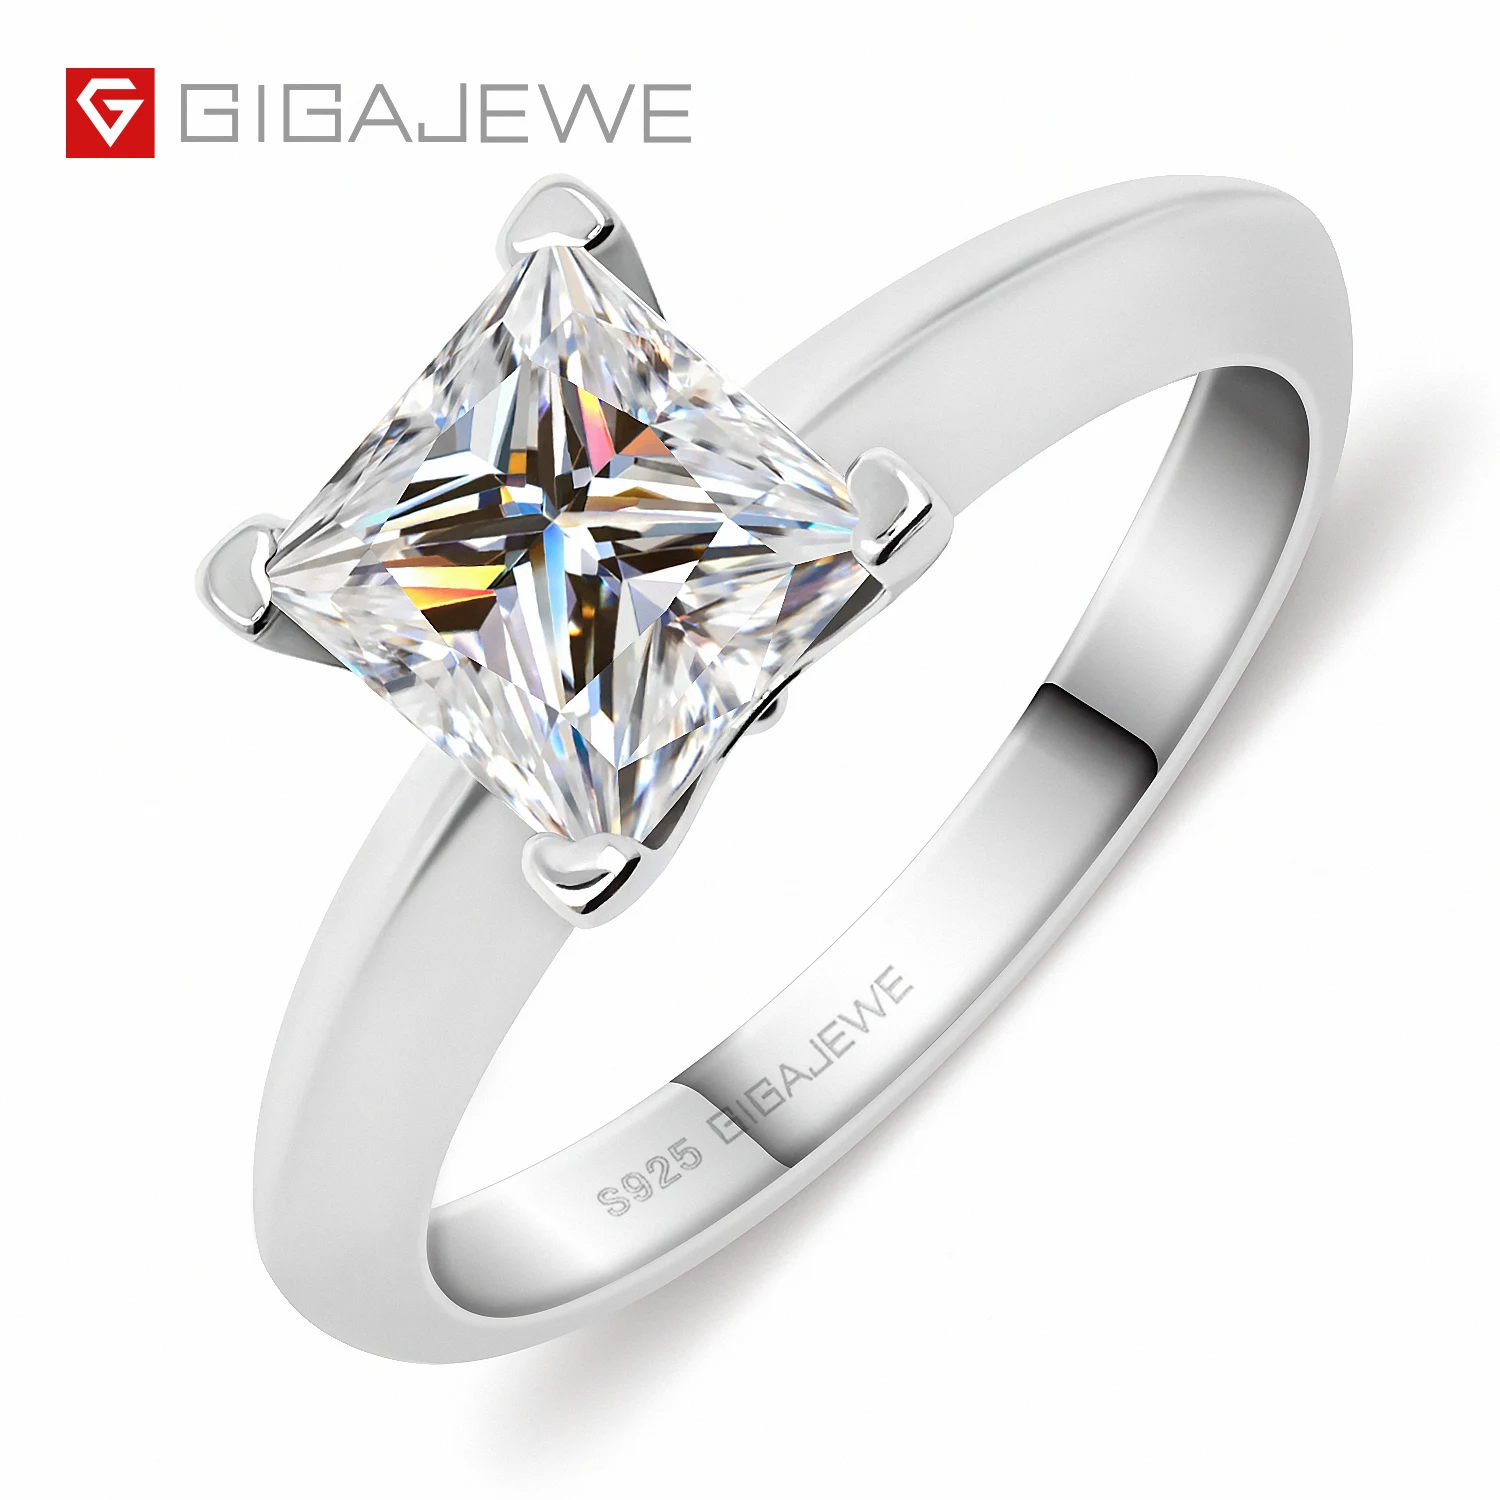 

GIGAJEWE 1.2ct 6.0mm EF Princess 18K White Gold Plated 925 Silver Moissanite Ring Diamond Test Passed Jewelry Woman Girl Gift, White f color